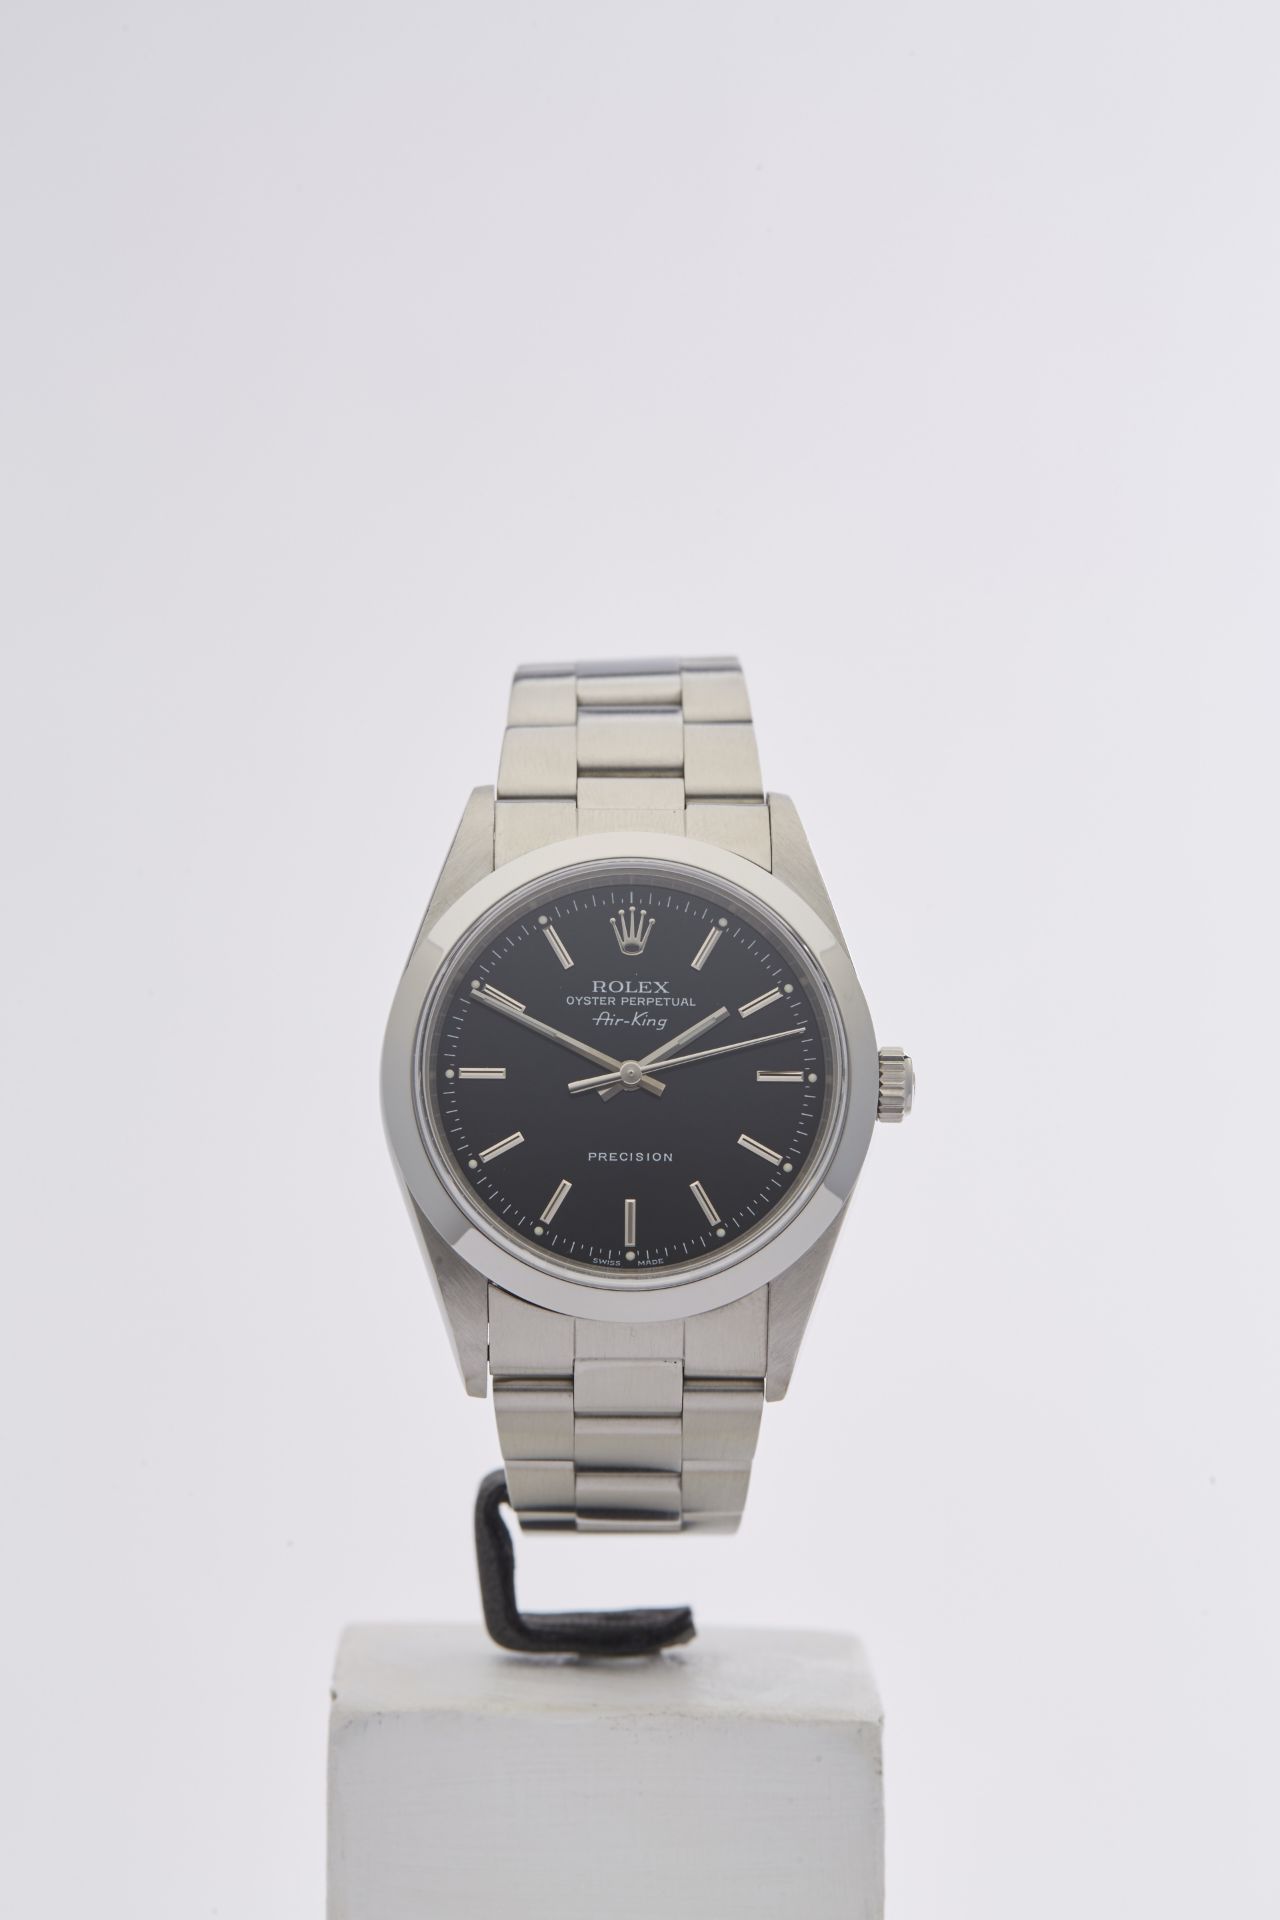 Rolex Air King 34mm Stainless Steel 14010 - Image 10 of 24